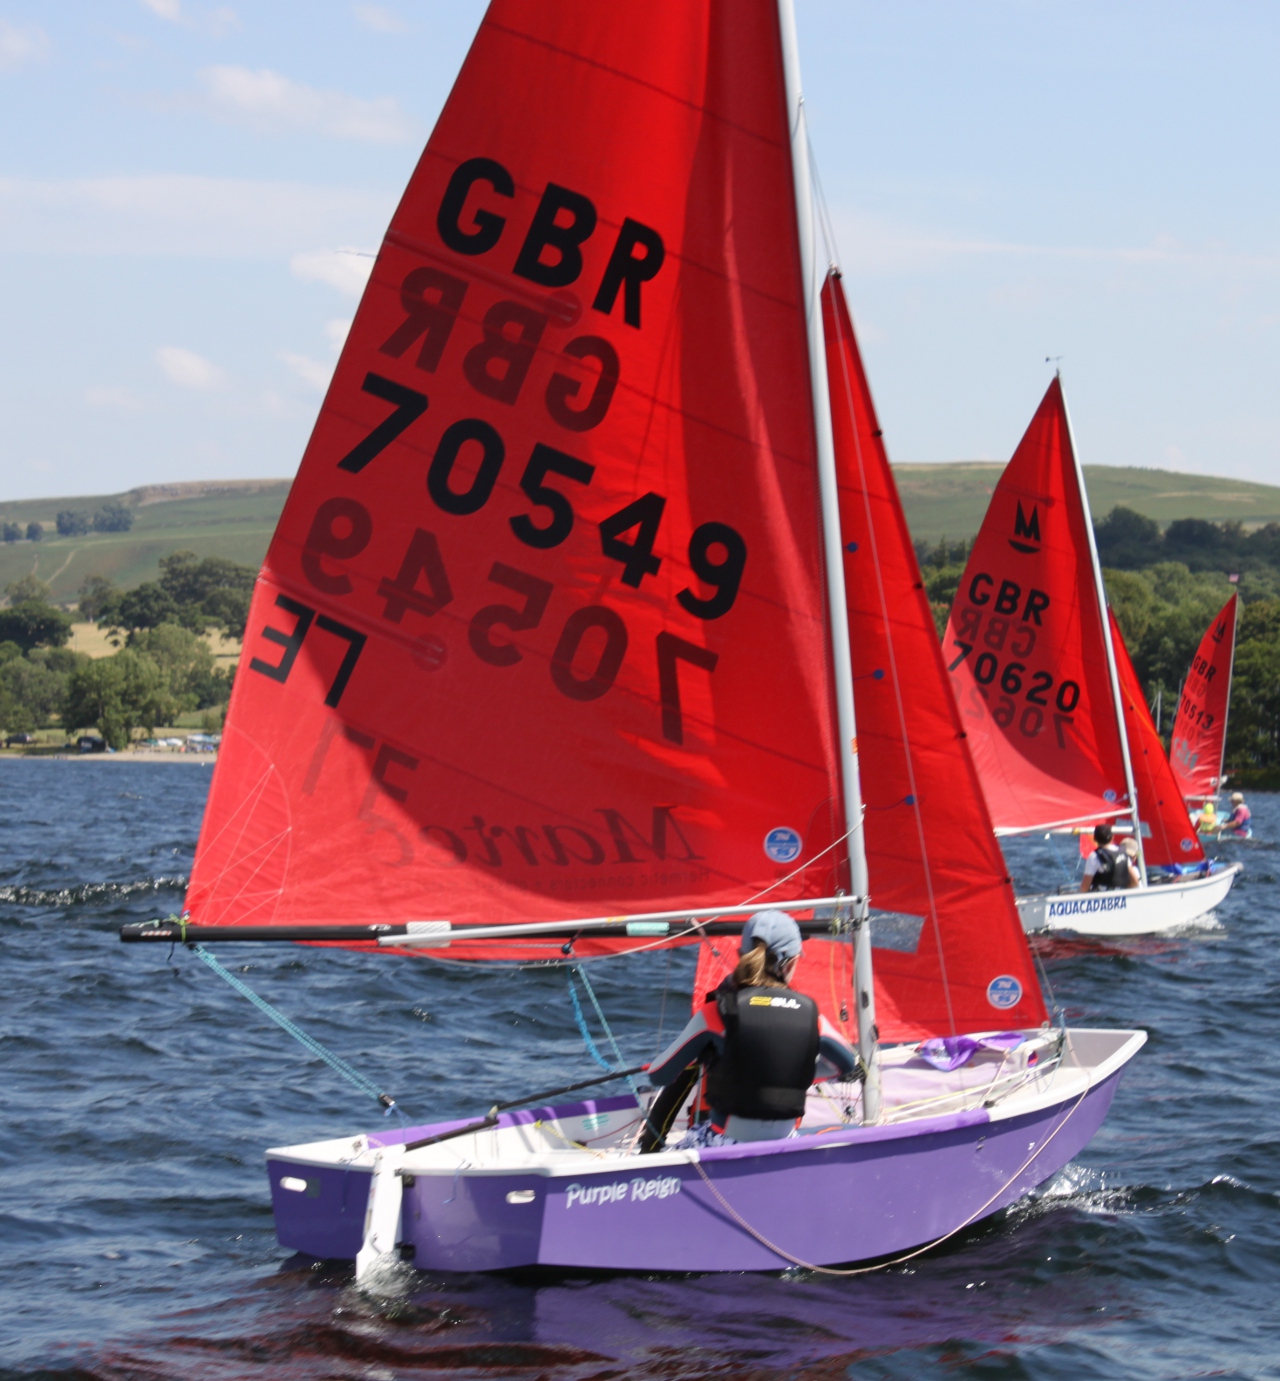 A purple and white GRP Mirror dinghy racing on a lake in a moderate wind